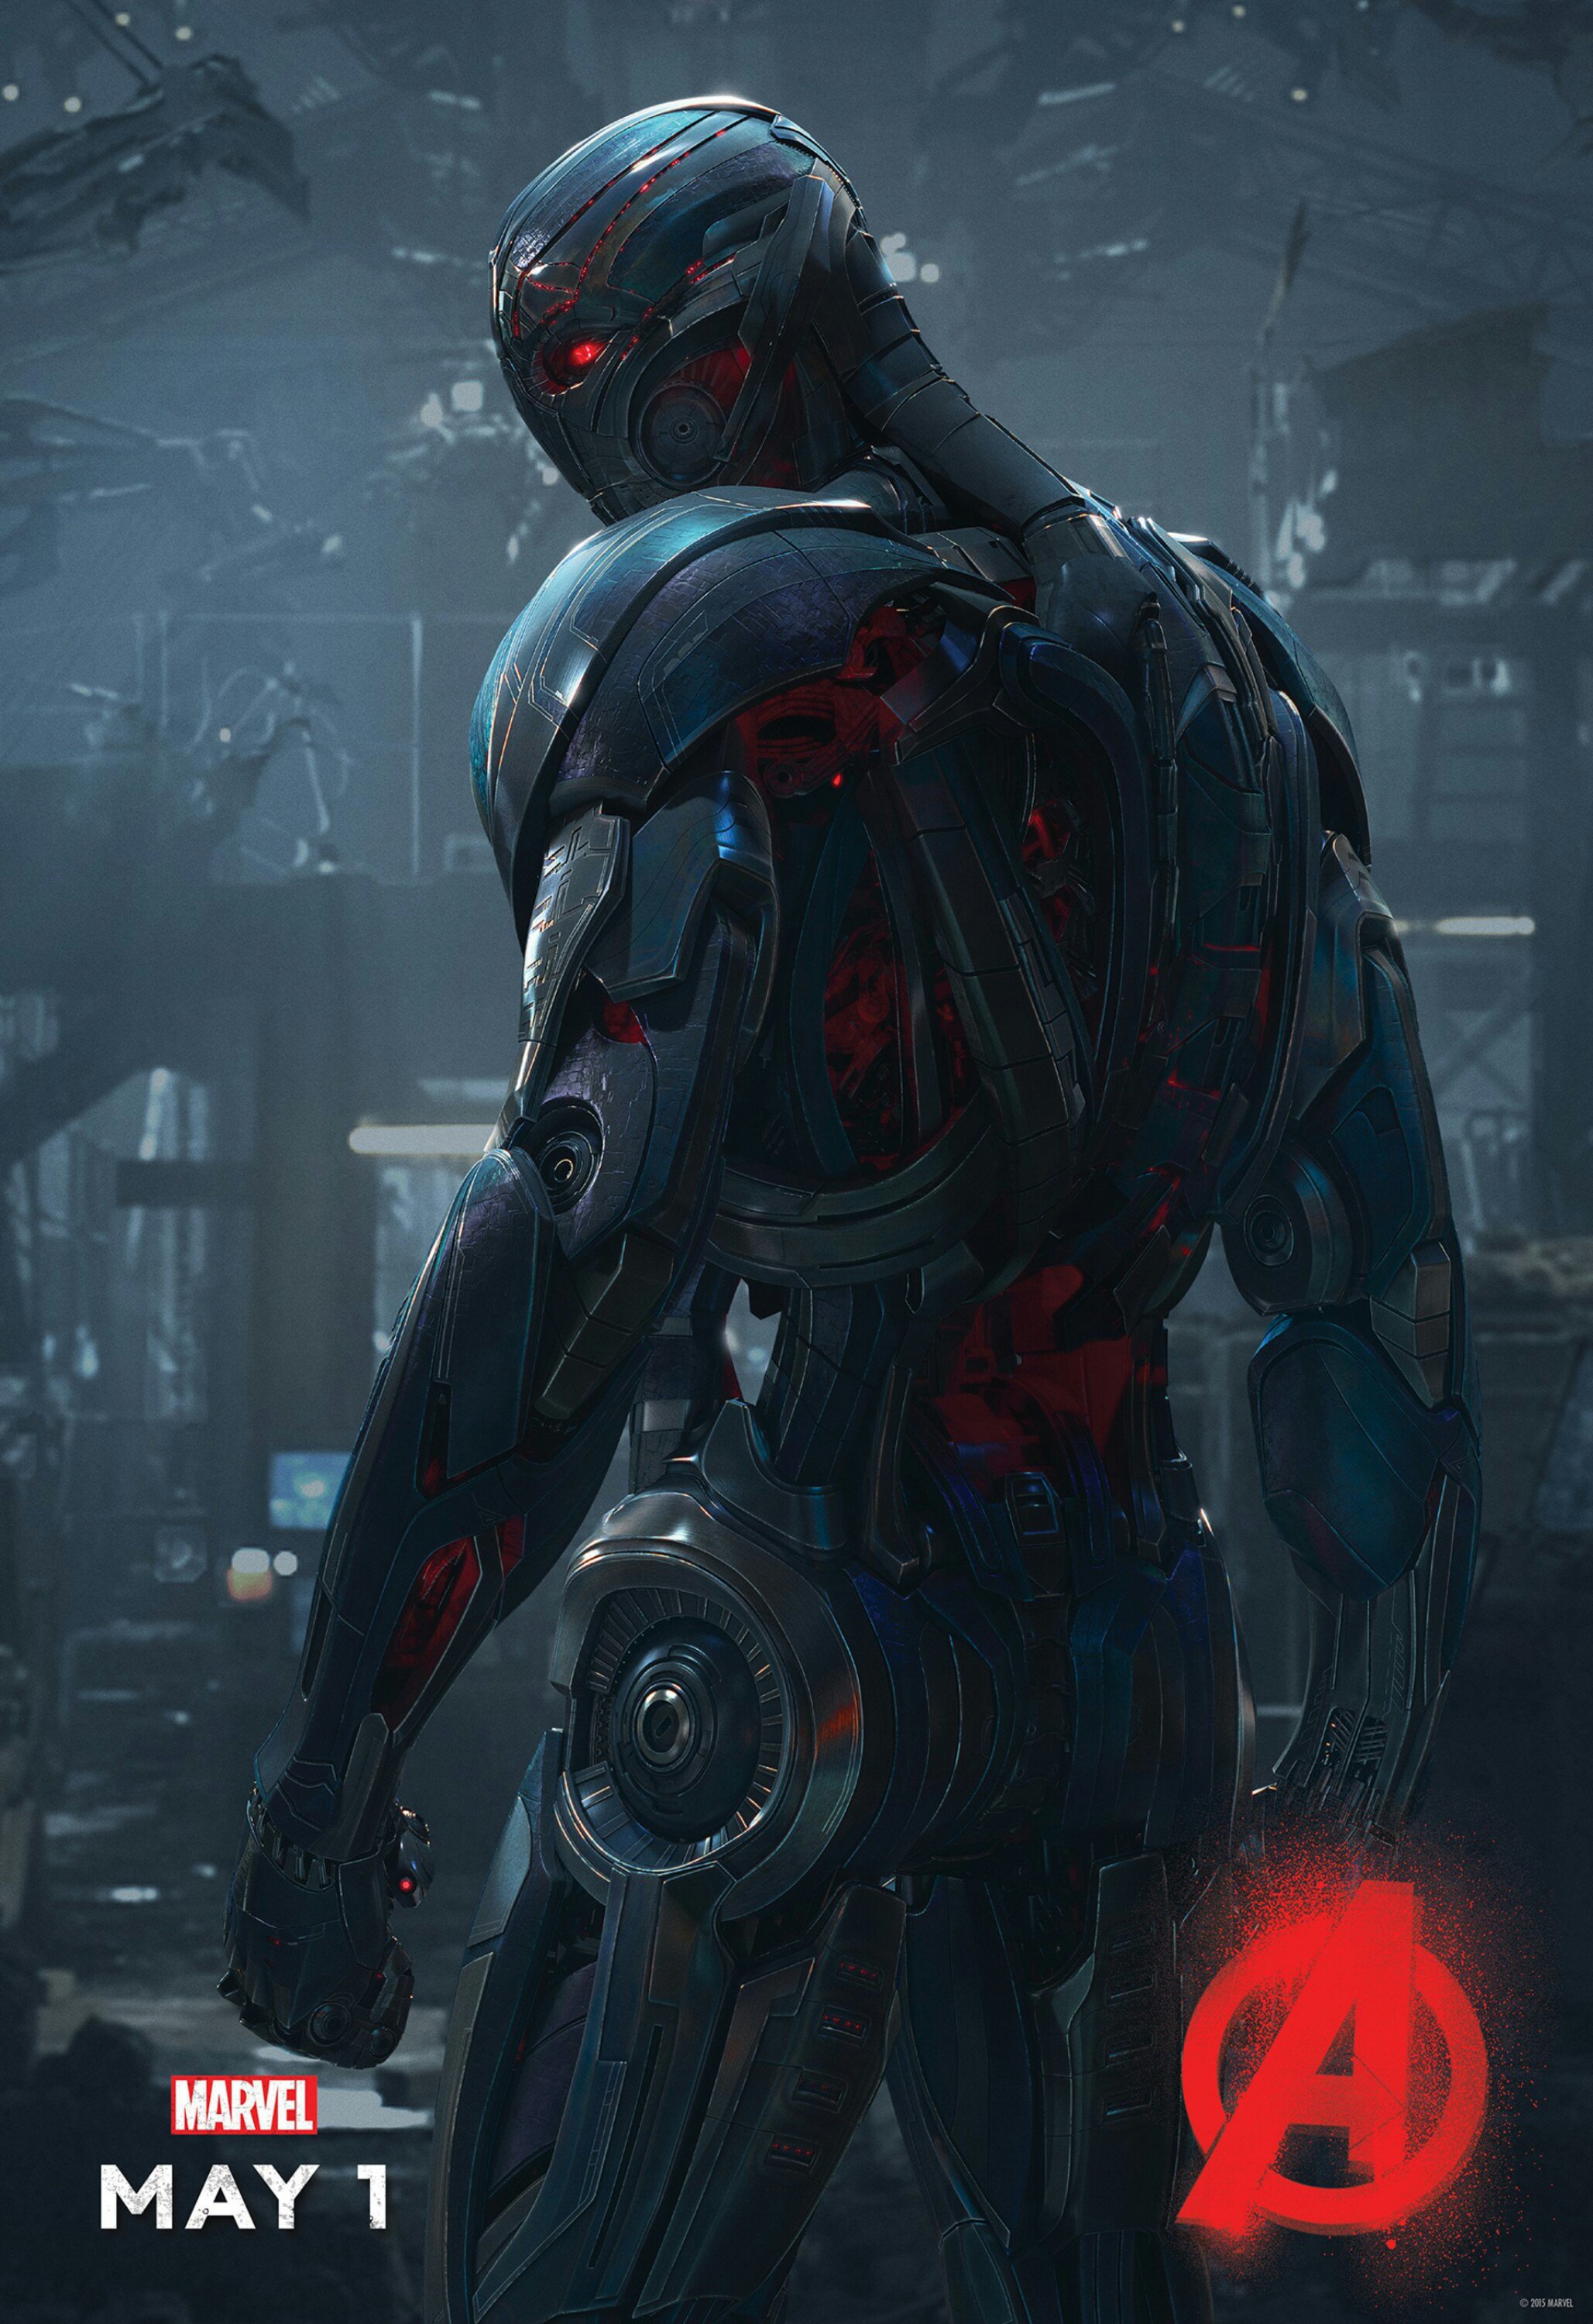 Mega Sized Movie Poster Image for Avengers: Age of Ultron (#22 of 36)